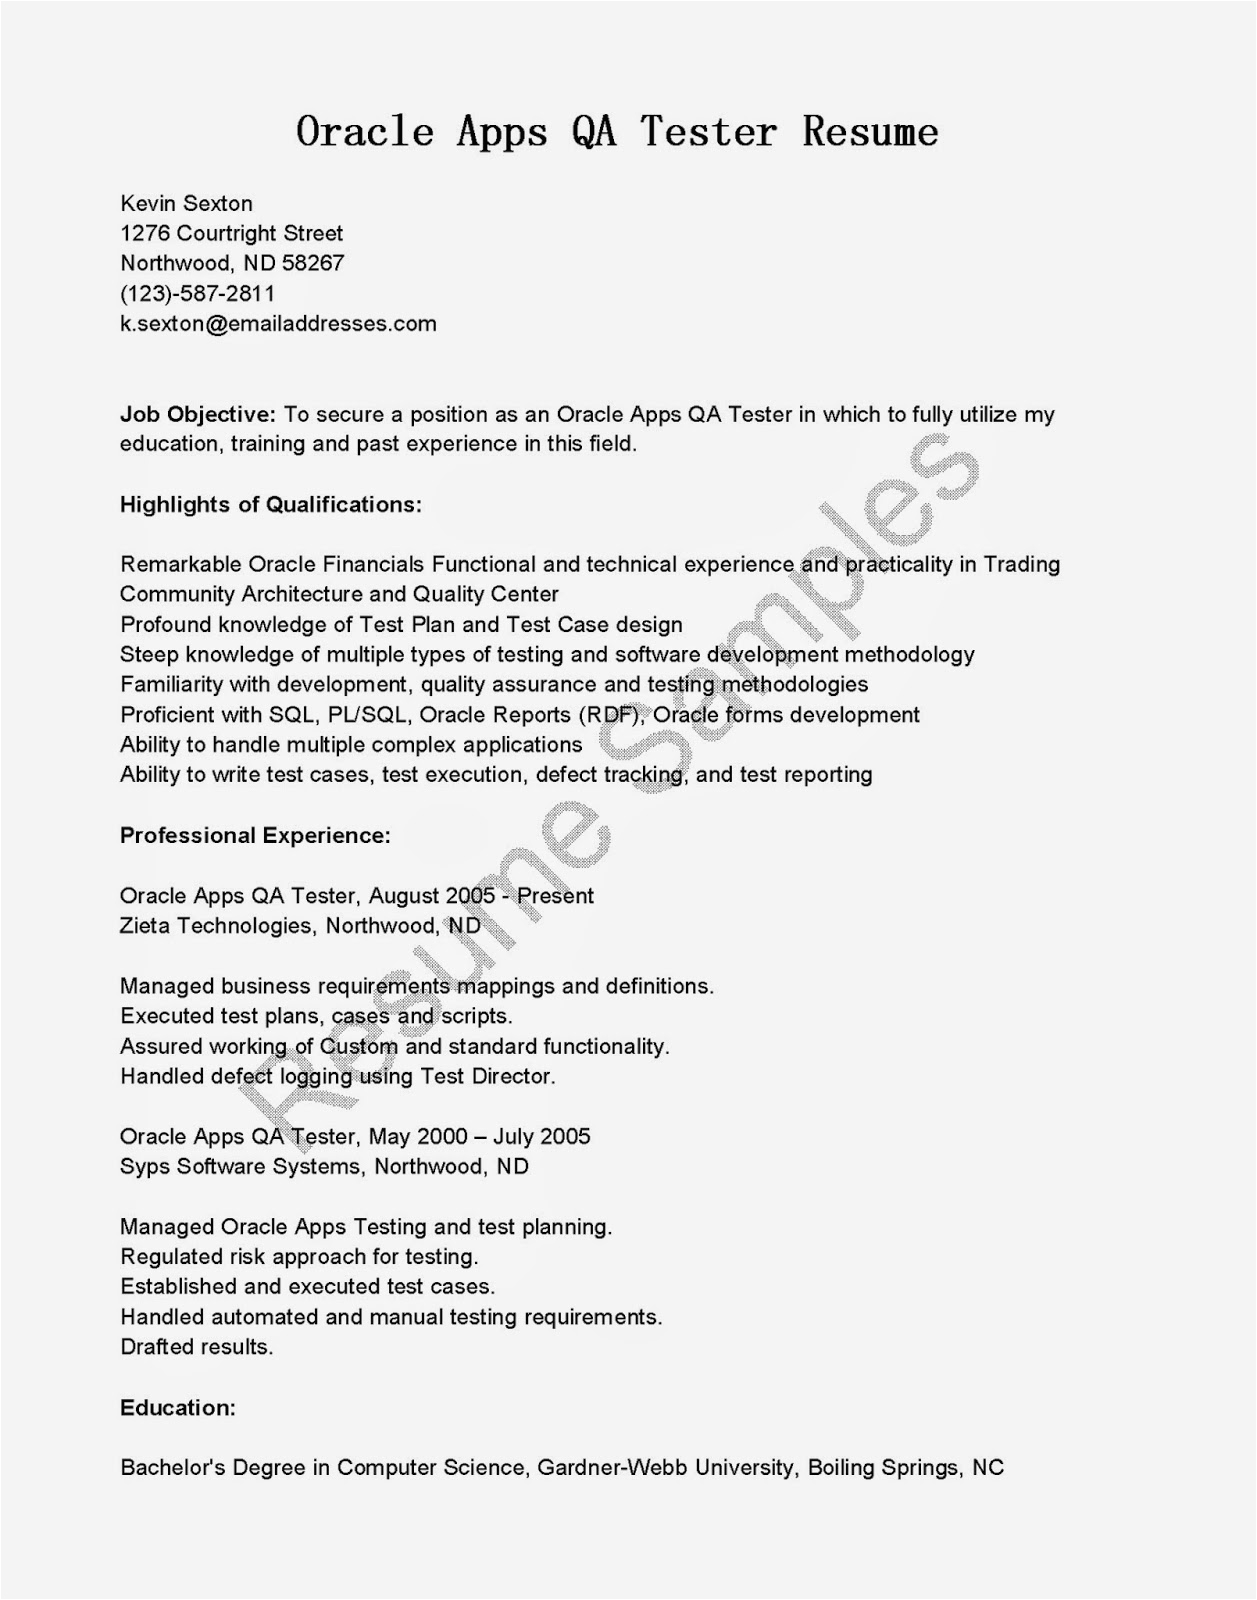 Sample Email for Job Application with Qa Resume Resume Samples oracle Apps Qa Tester Resume Sample